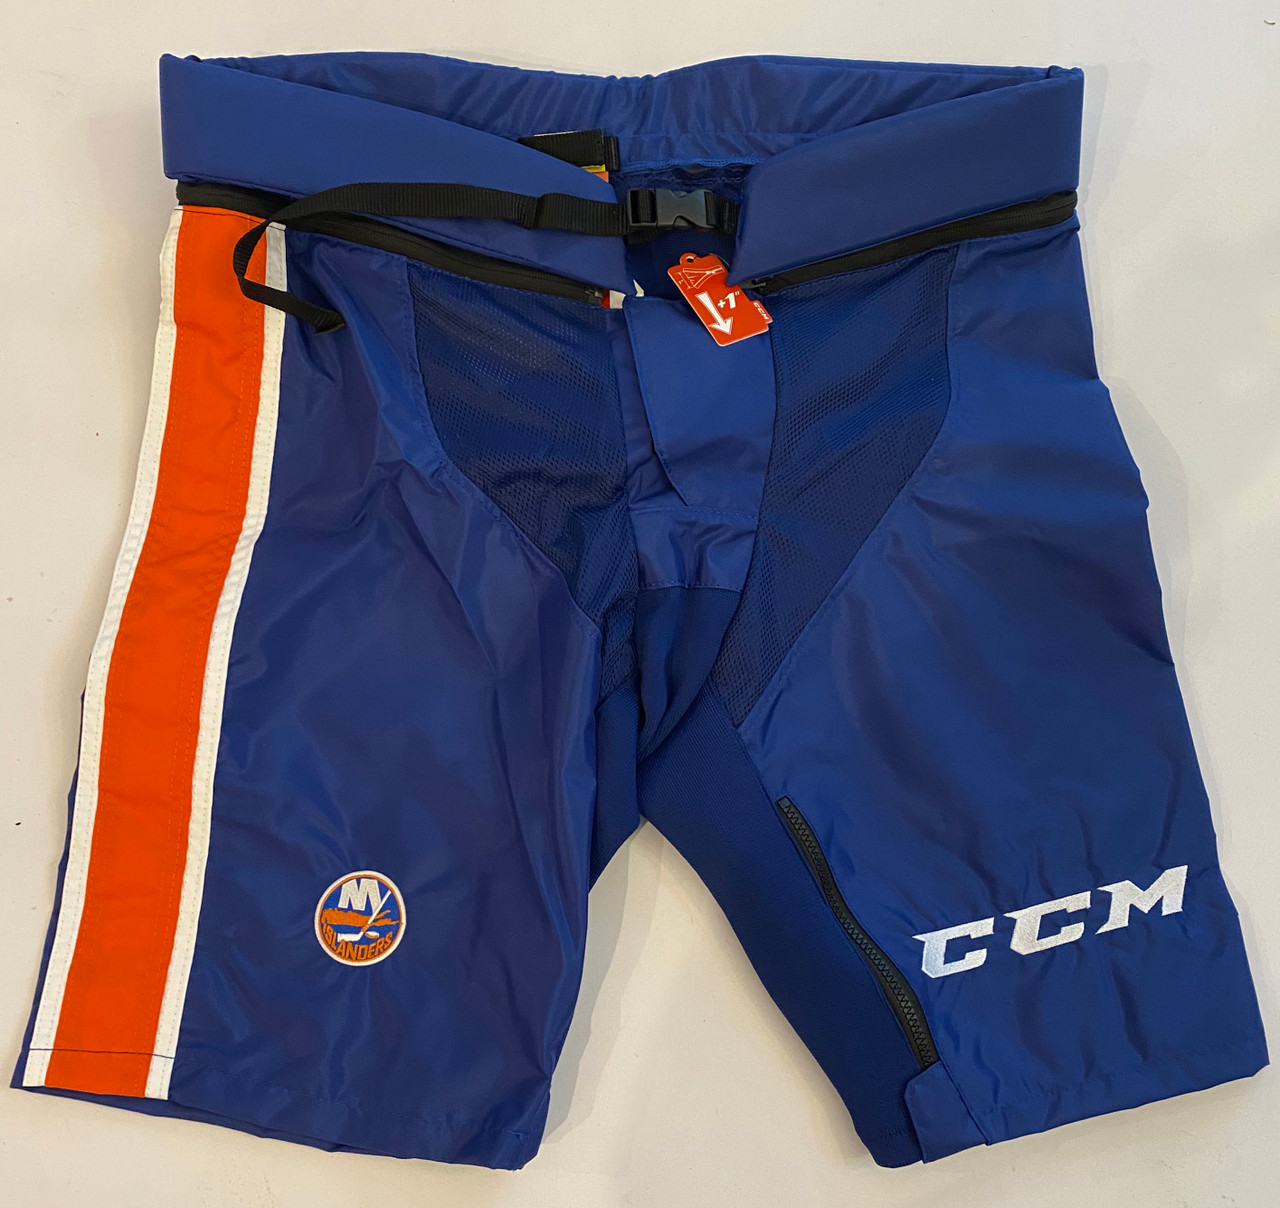 Hockey Pants vs Girdles: Which are Best? 